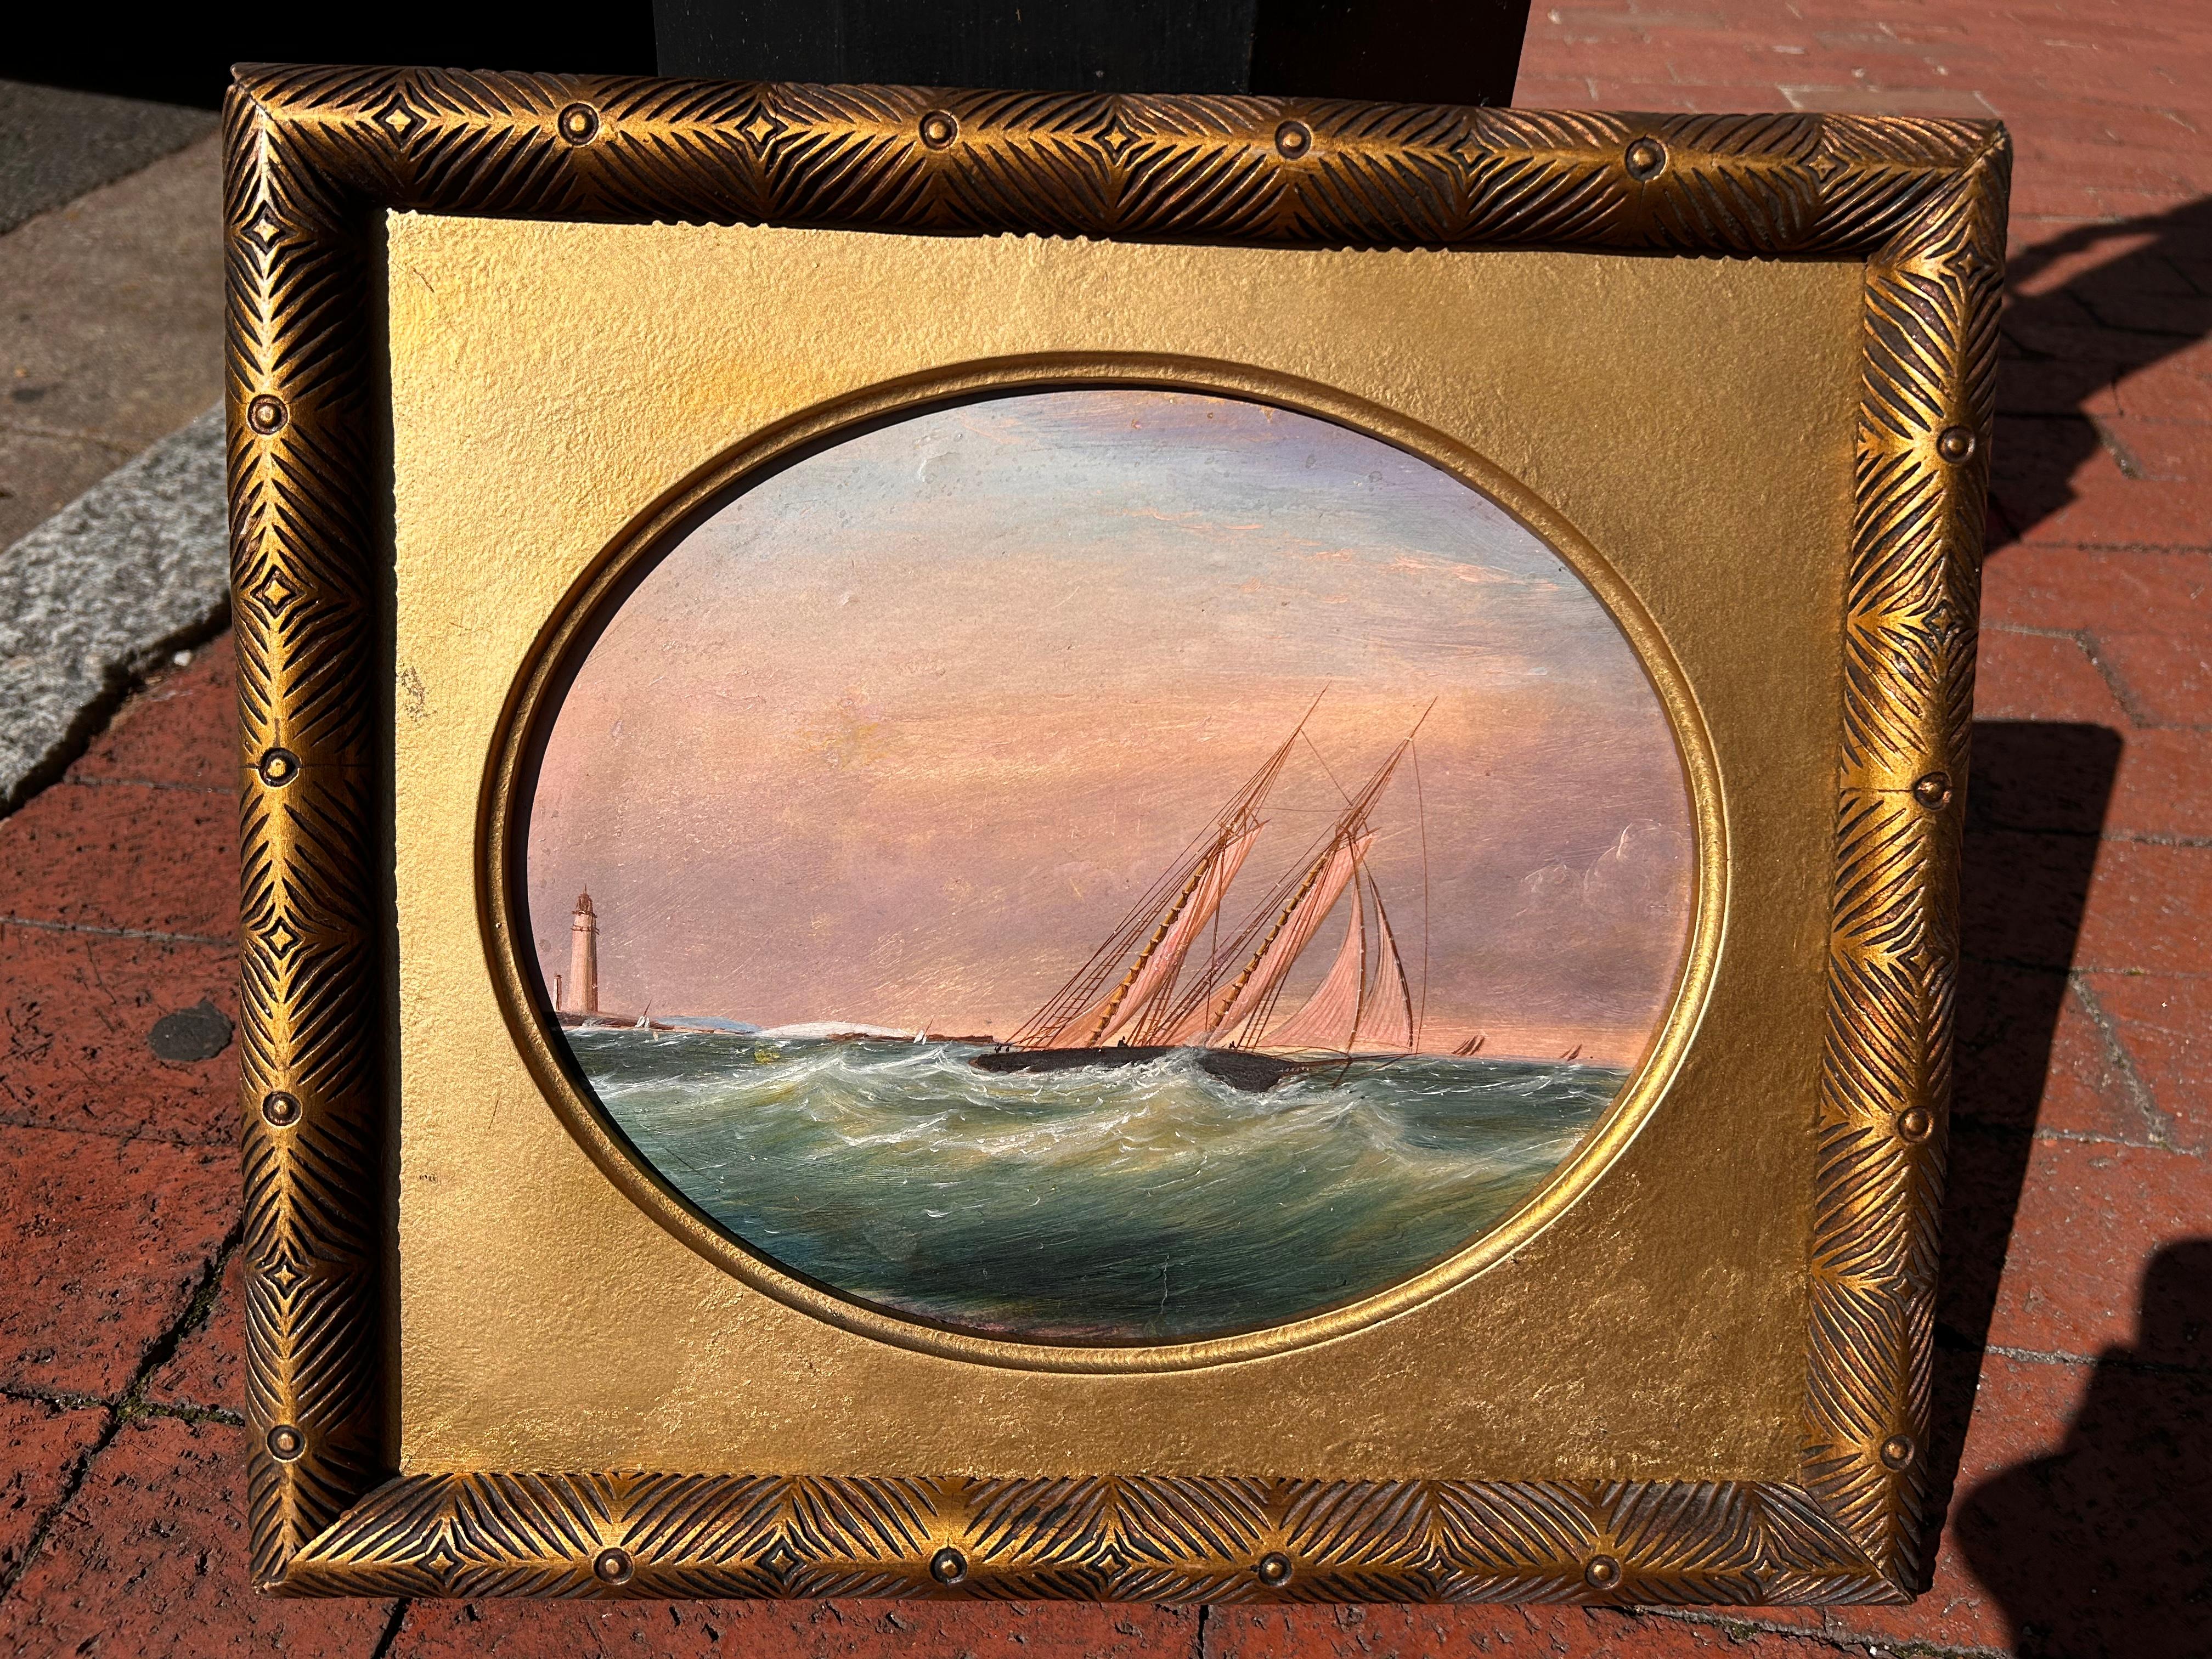 Landscape of A Schooner Sailing Near Lighthouse - Painting by Clement Drew